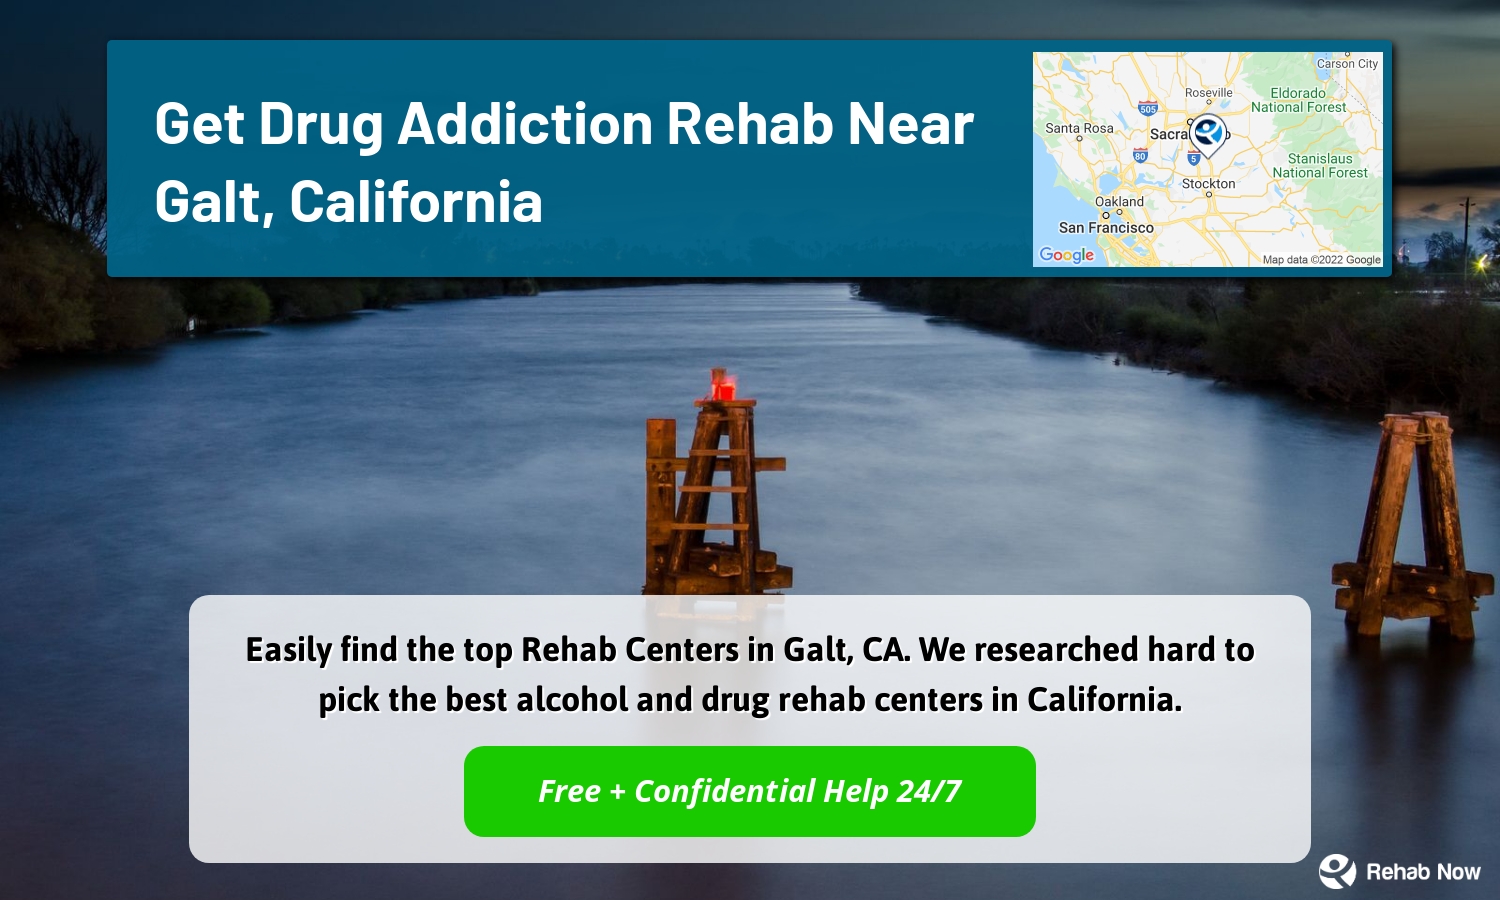 Easily find the top Rehab Centers in Galt, CA. We researched hard to pick the best alcohol and drug rehab centers in California.